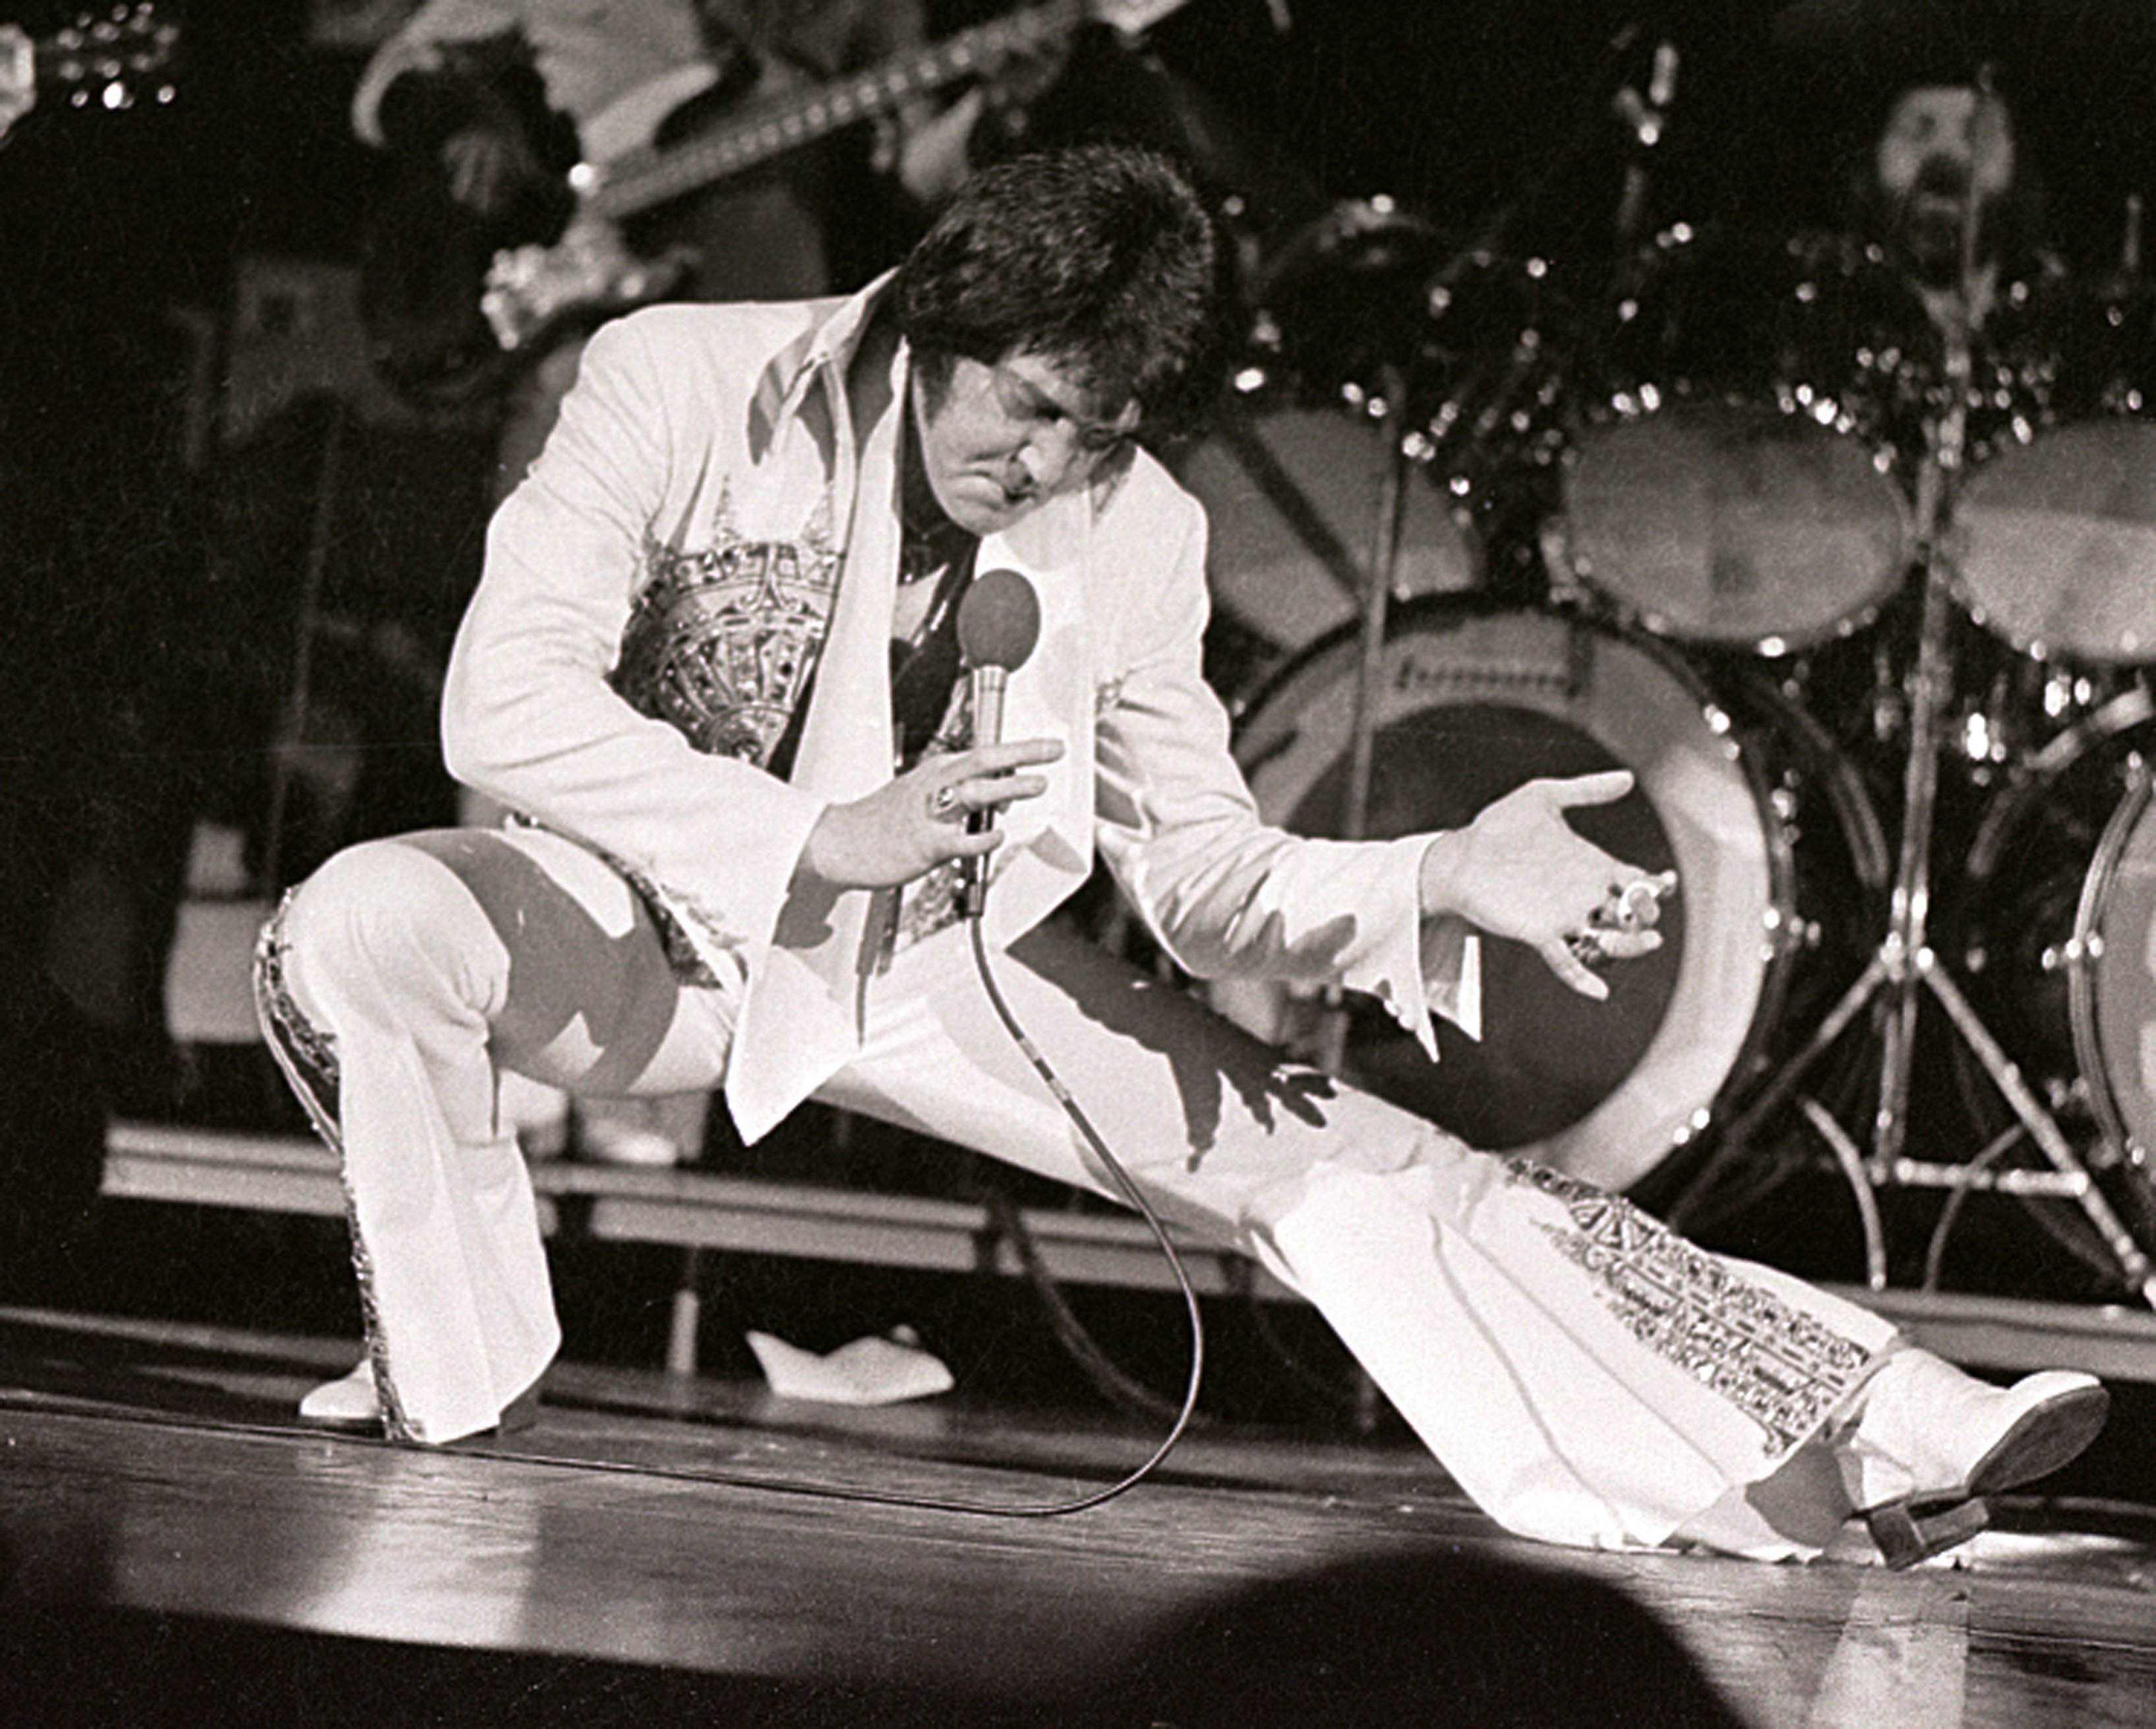 A black and white picture of Elvis Presley singing into a microphone while in a lunge position.